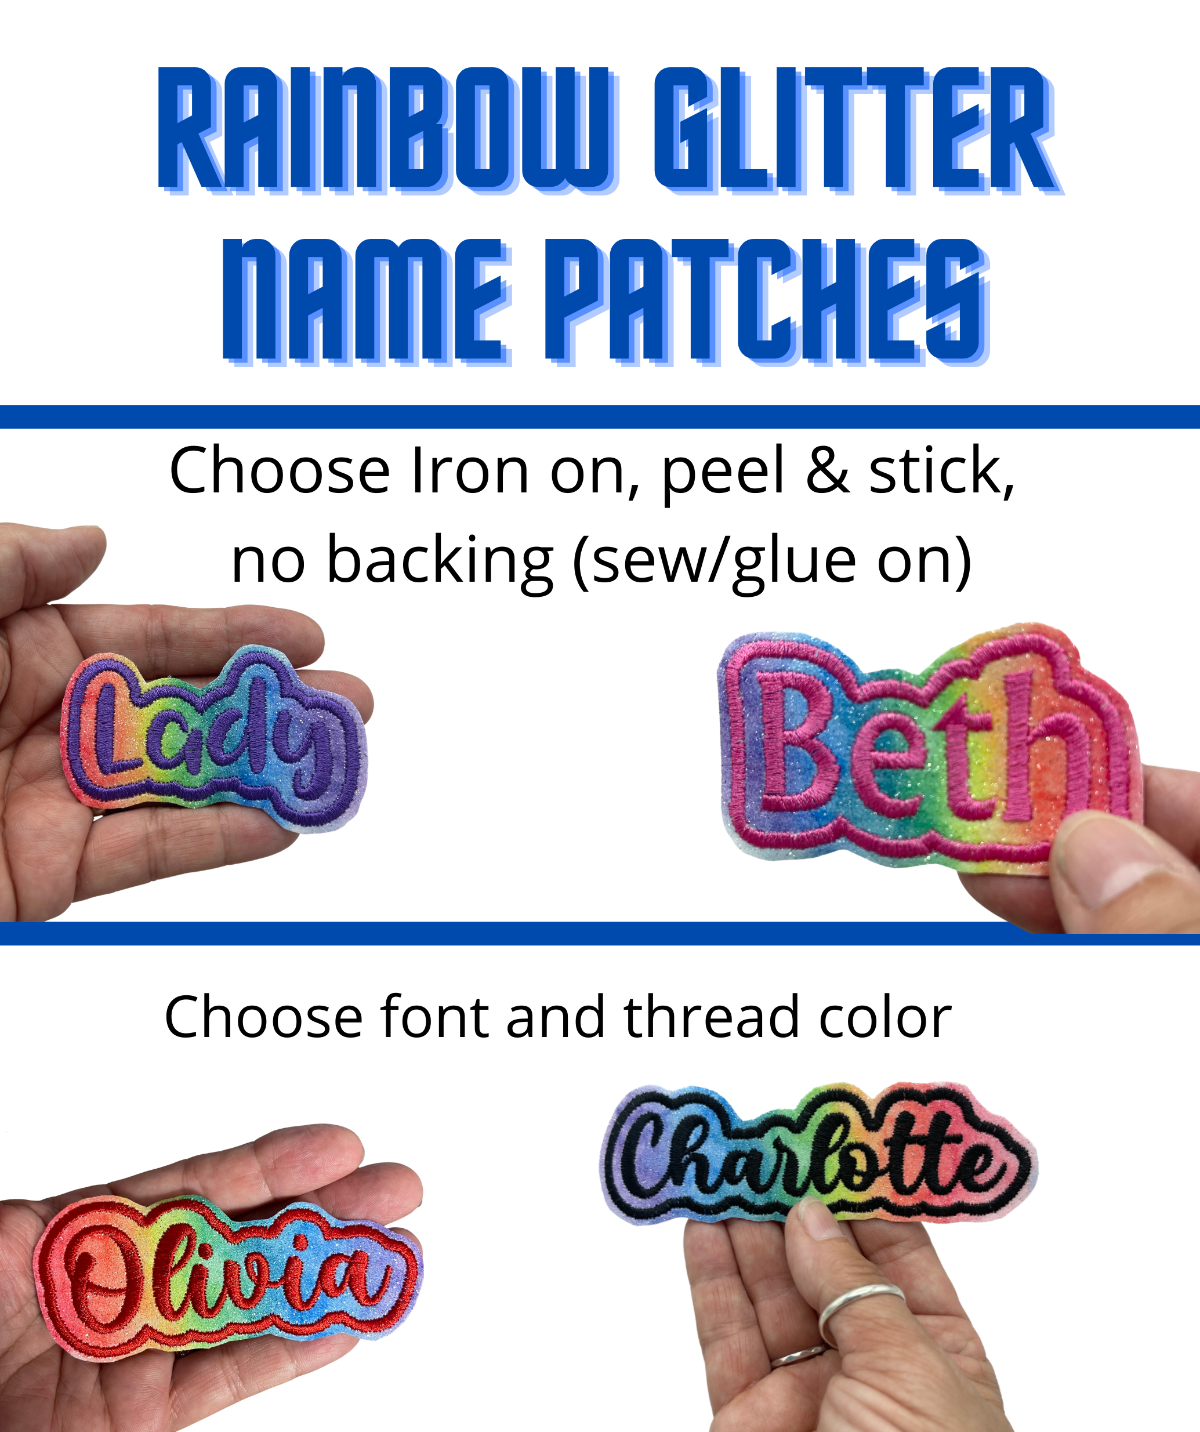 Rainbow glitter name patch